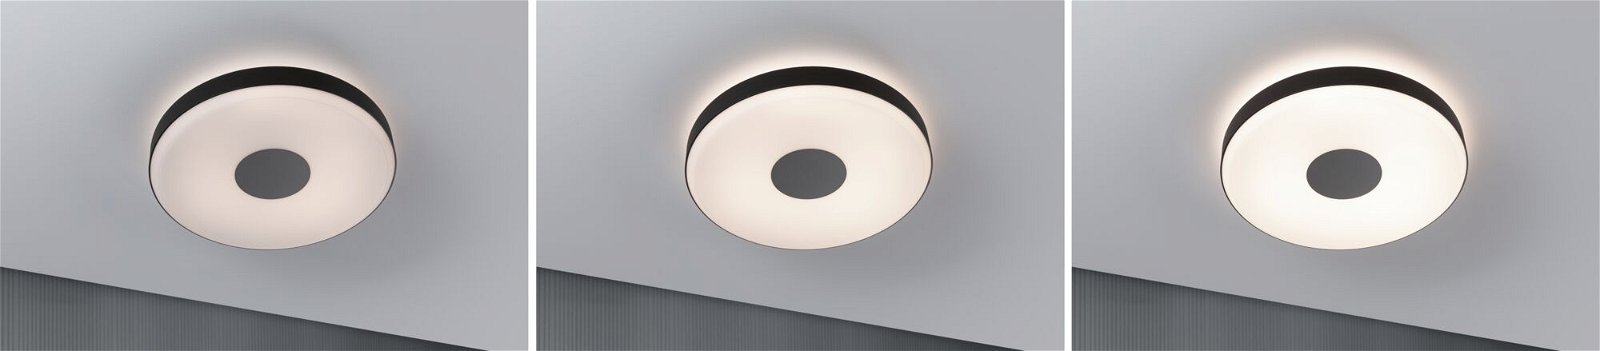 LED Ceiling luminaire Smart Home Zigbee 3.0 Puric Pane Effect 2700K 200lm / 1.900lm 230V 16 / 1x1,5W dimmable Black/Grey